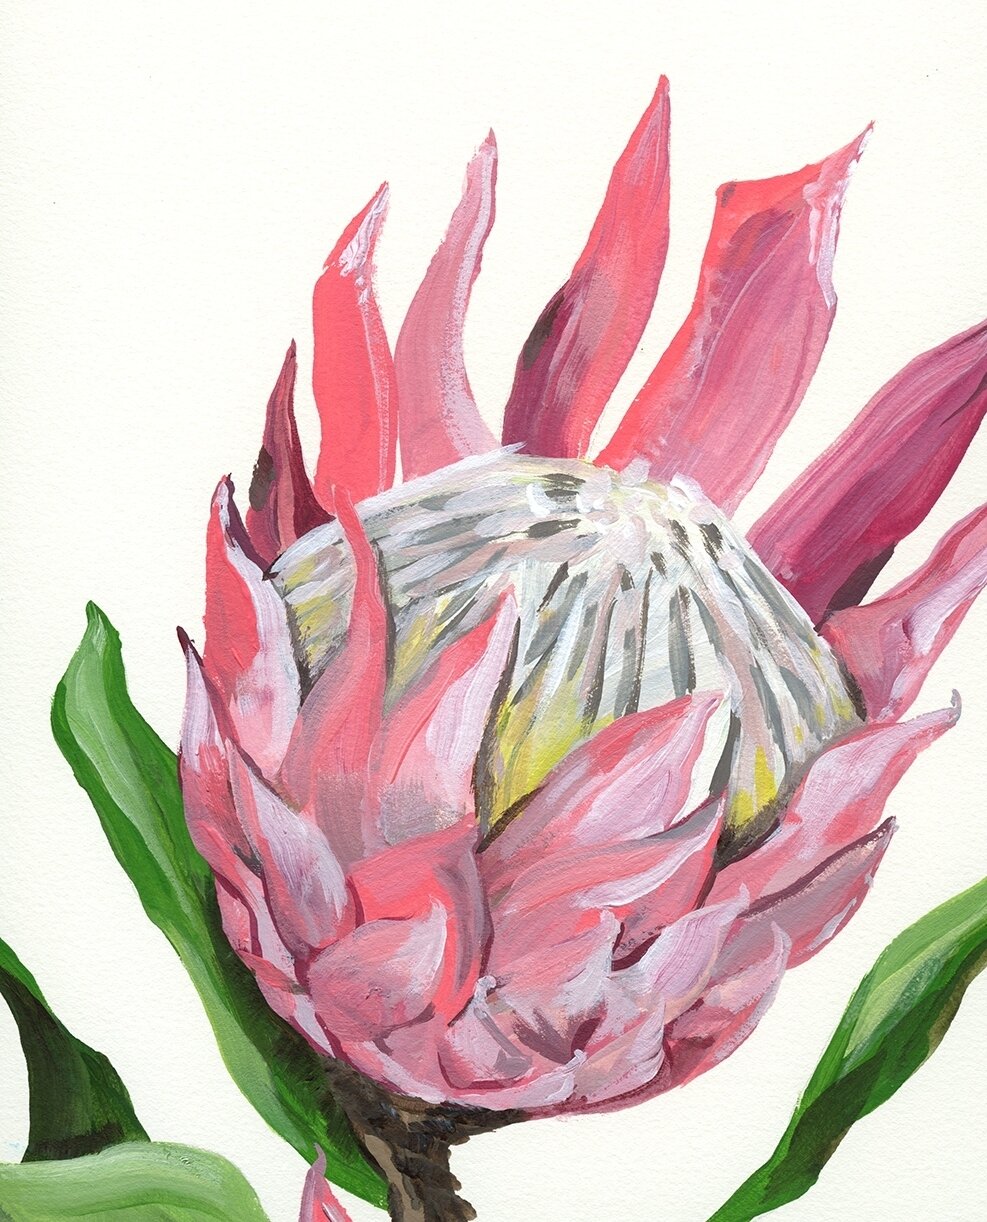 As a kid I avoided pink.  There were too many connotations associated with it (I was an 80's kid after all) and I wanted to be the girl that was sporty, active as well as doing anything I wanted to aim for.⁠
⁠
This King Protea however needed all the 